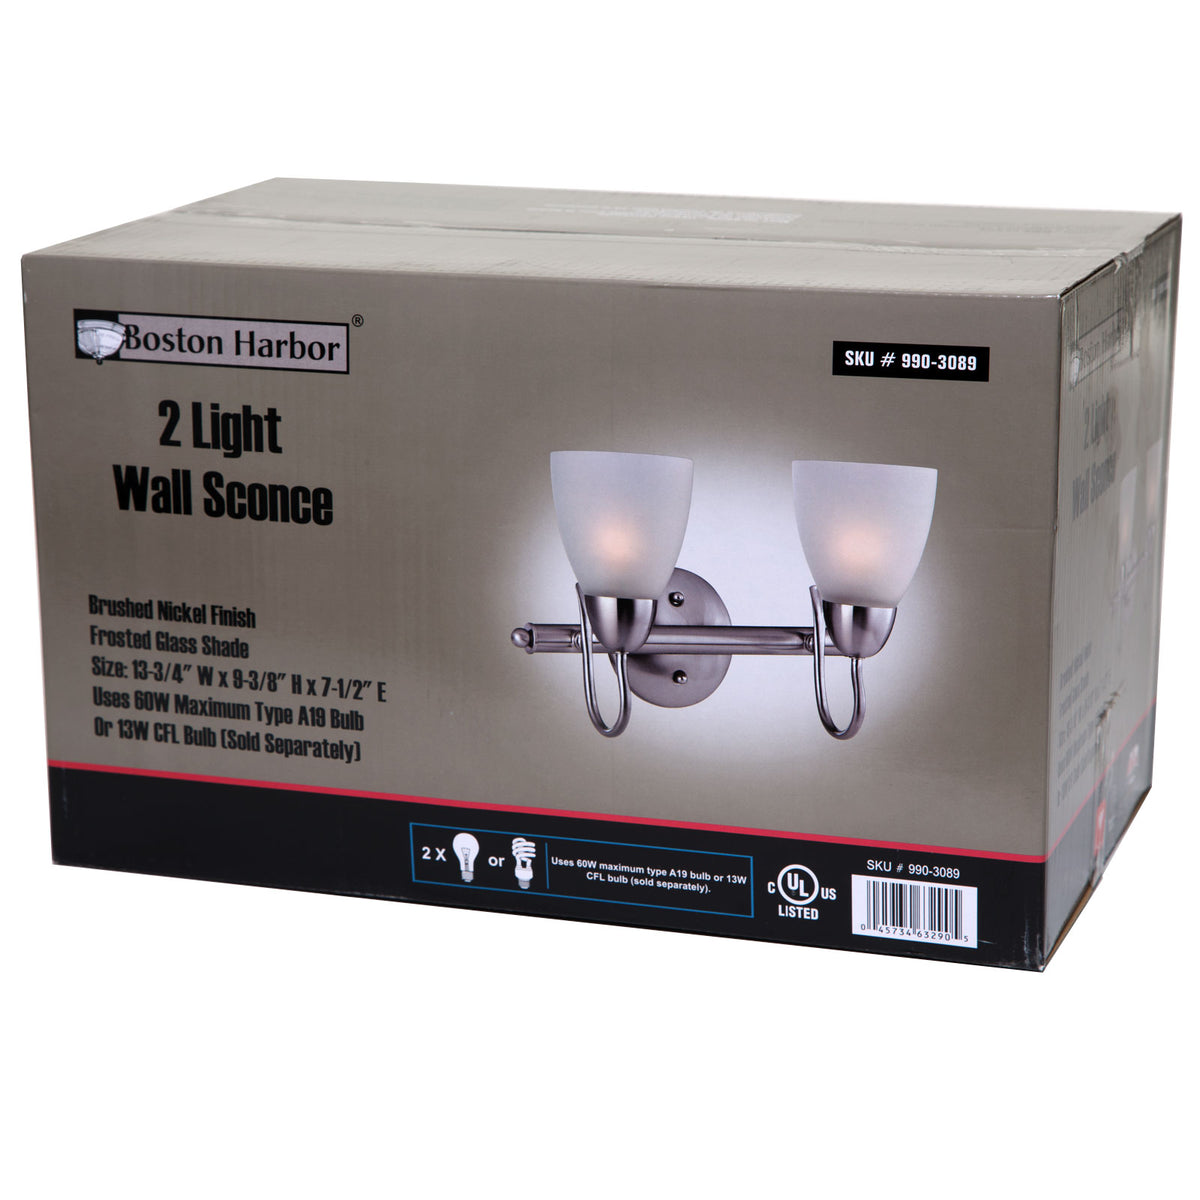 buy bathroom light fixtures at cheap rate in bulk. wholesale & retail outdoor lighting products store. home décor ideas, maintenance, repair replacement parts